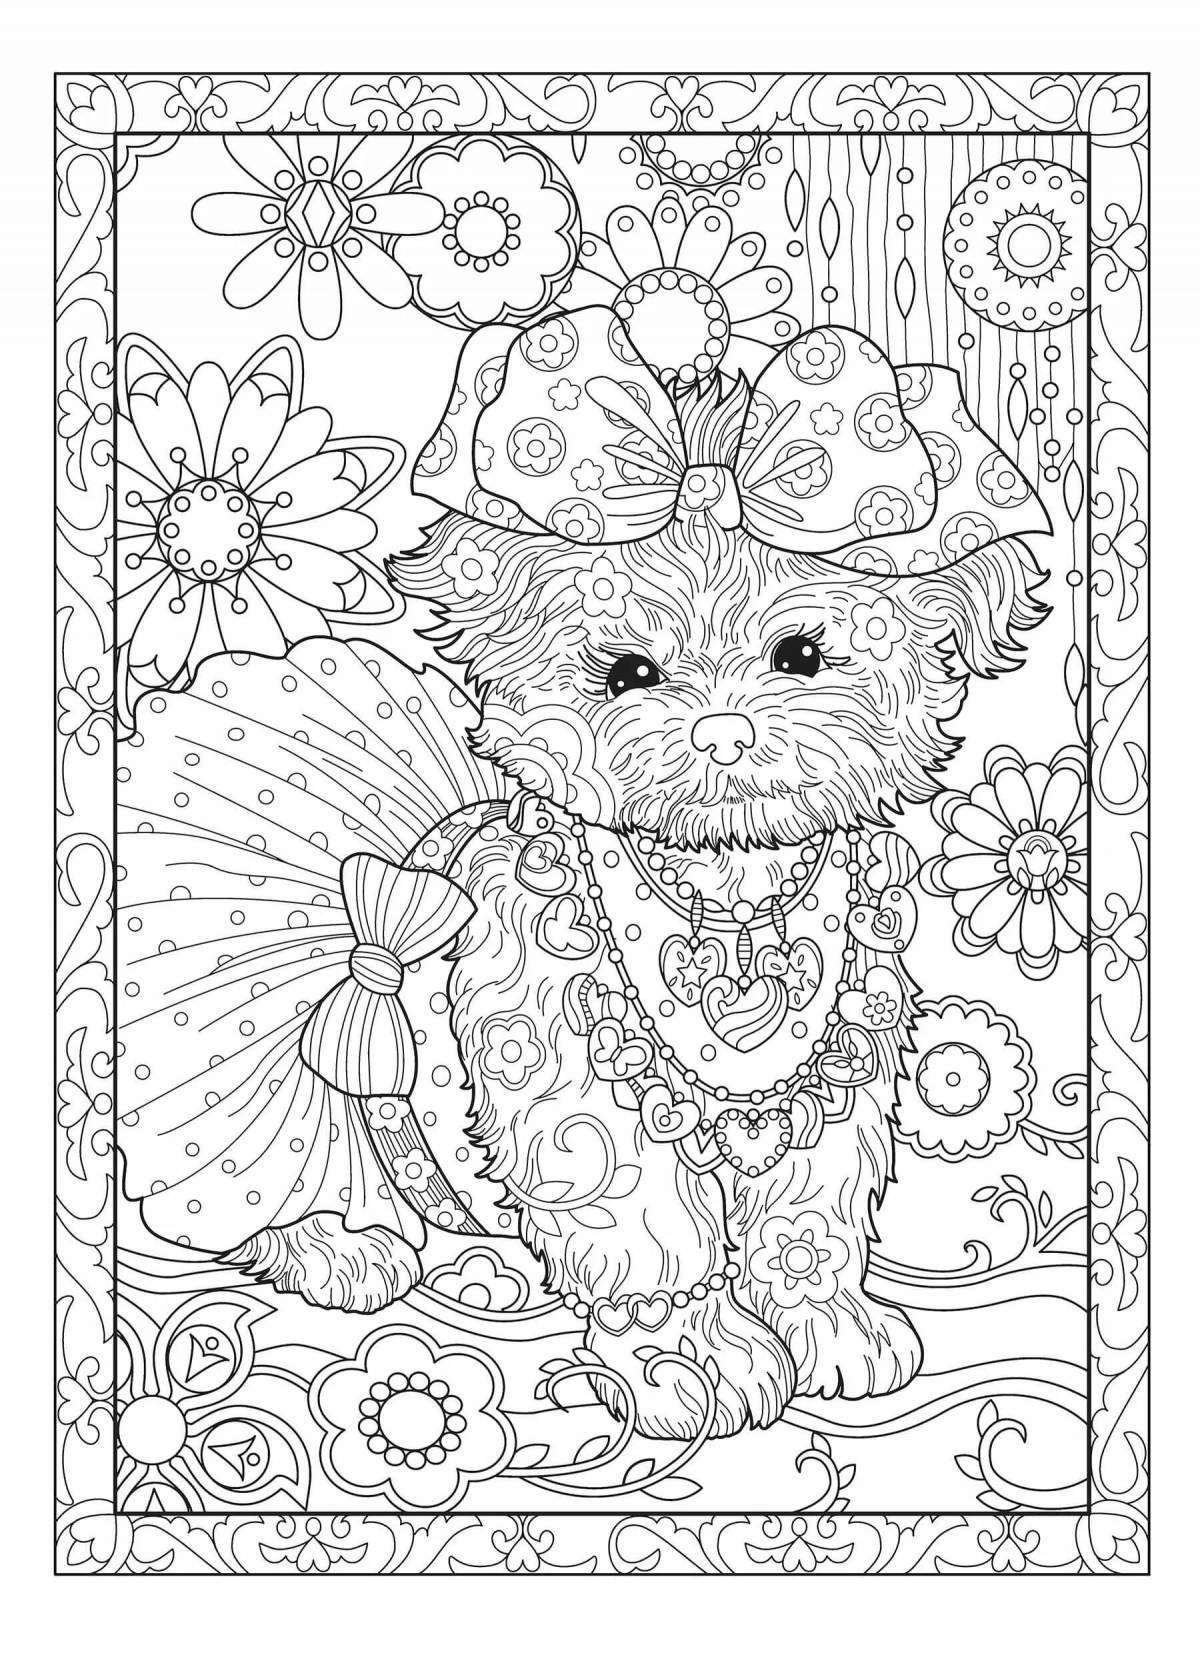 Cute animal coloring book for girls 12 years old